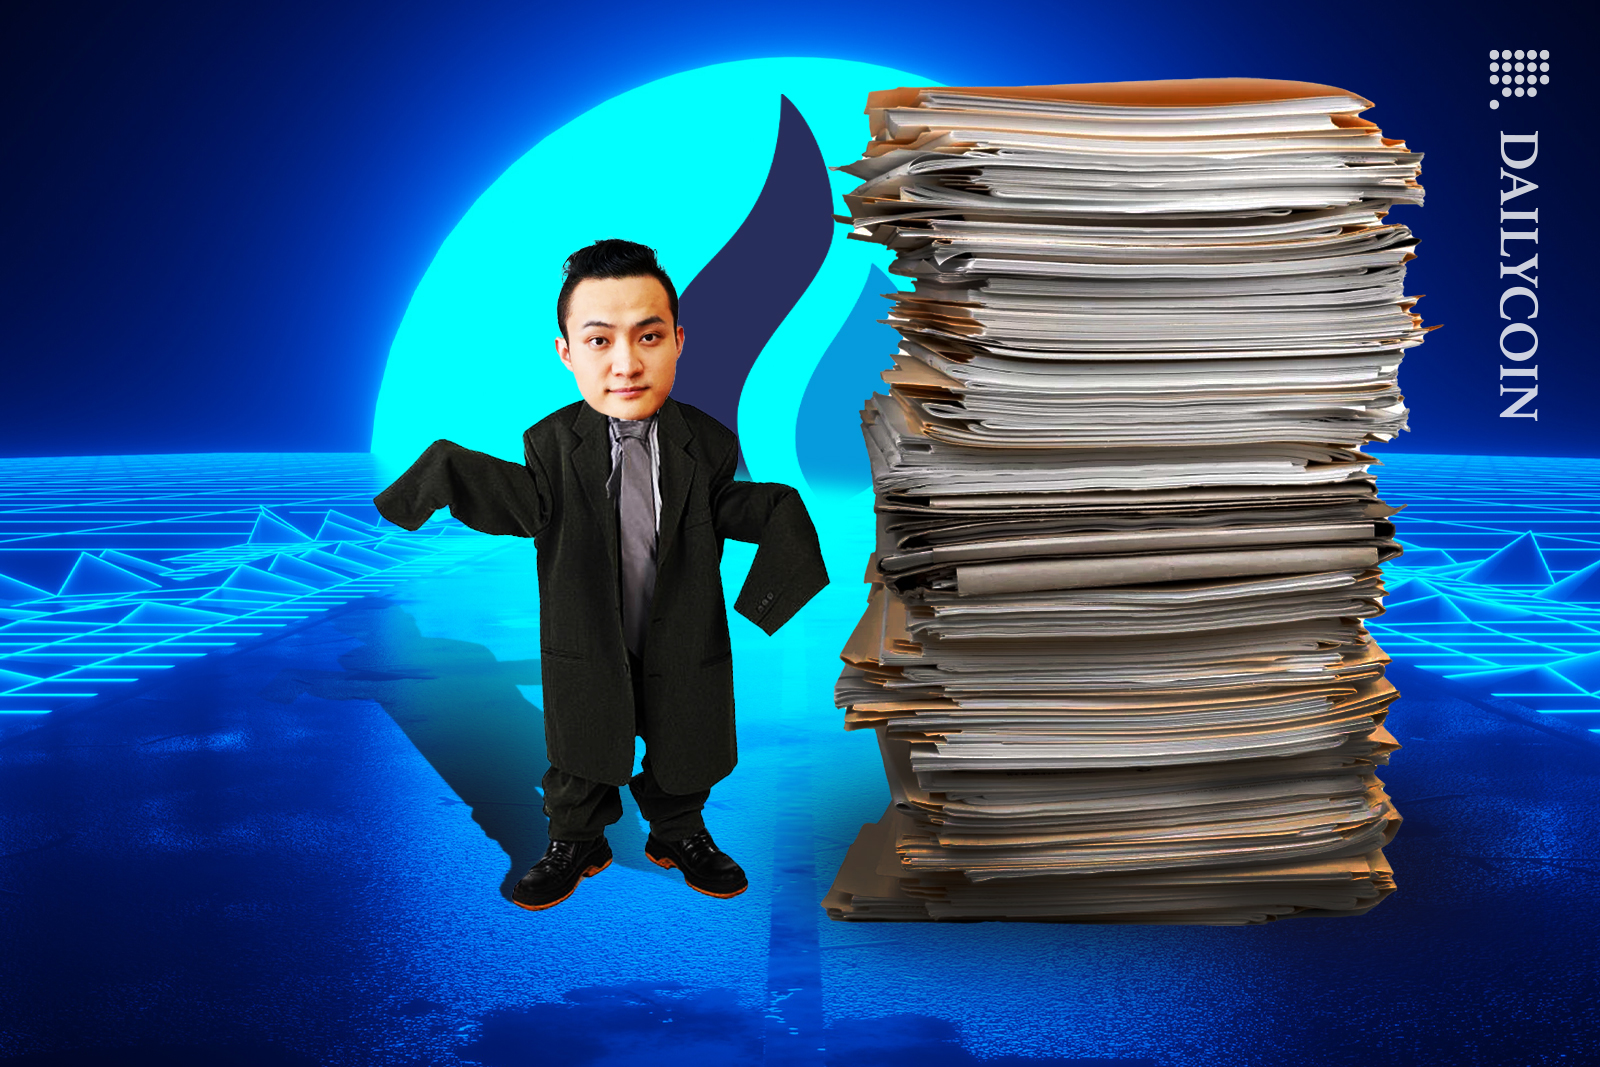 Justin Sun has his court suit outfit on, standing next to court papers in front of a rising Huobi logo.